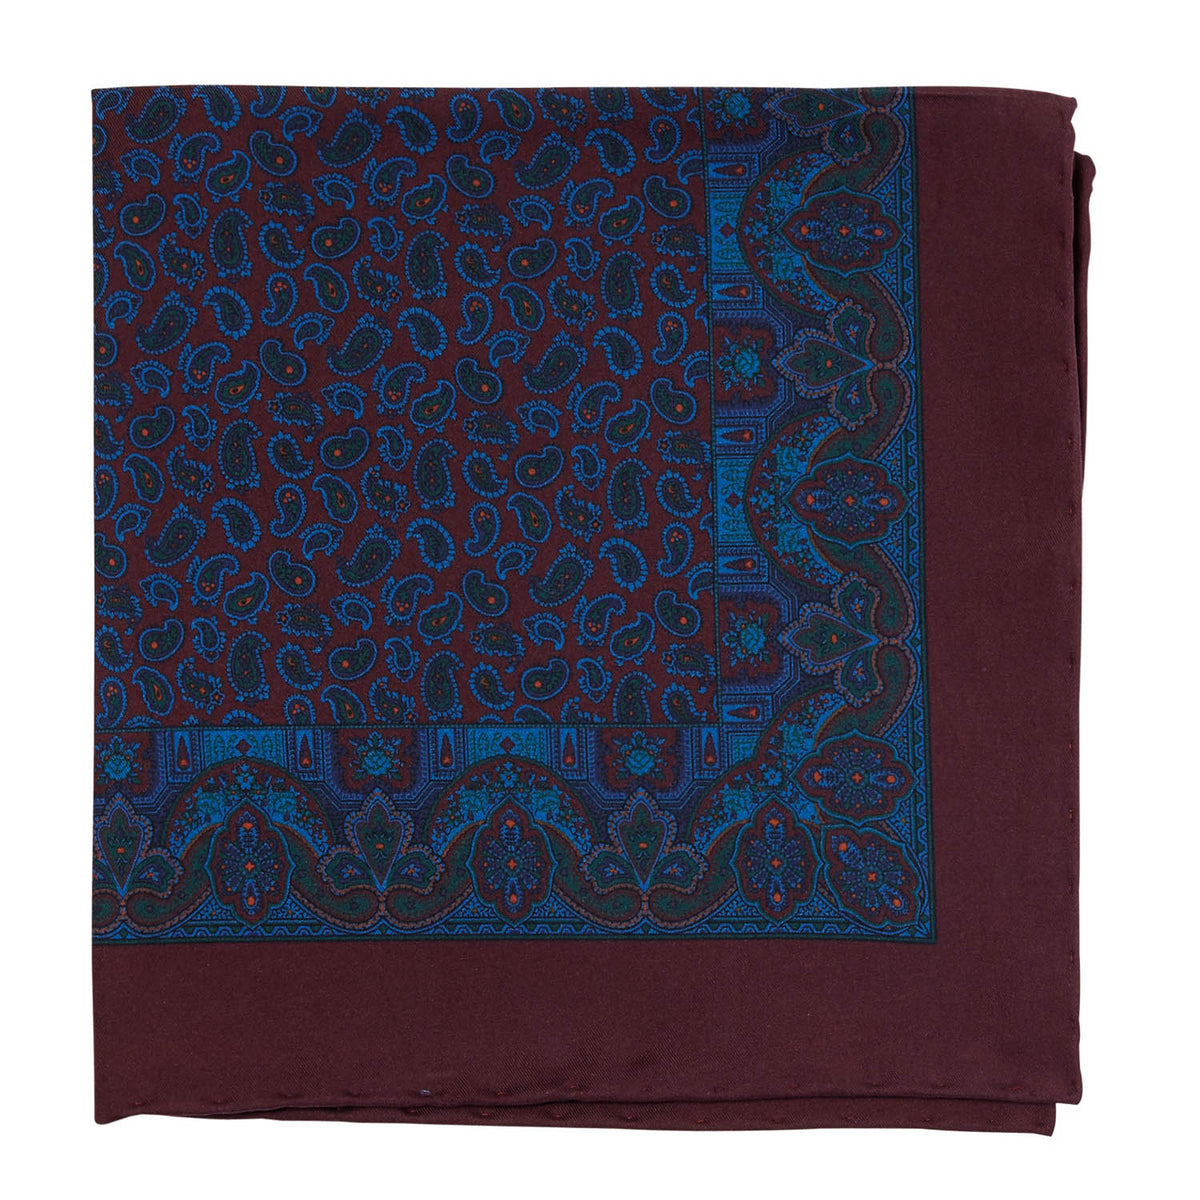 A Sovereign Grade Ancient Madder Burgundy Pocket Square with a burgundy and blue paisley pattern, from KirbyAllison.com.